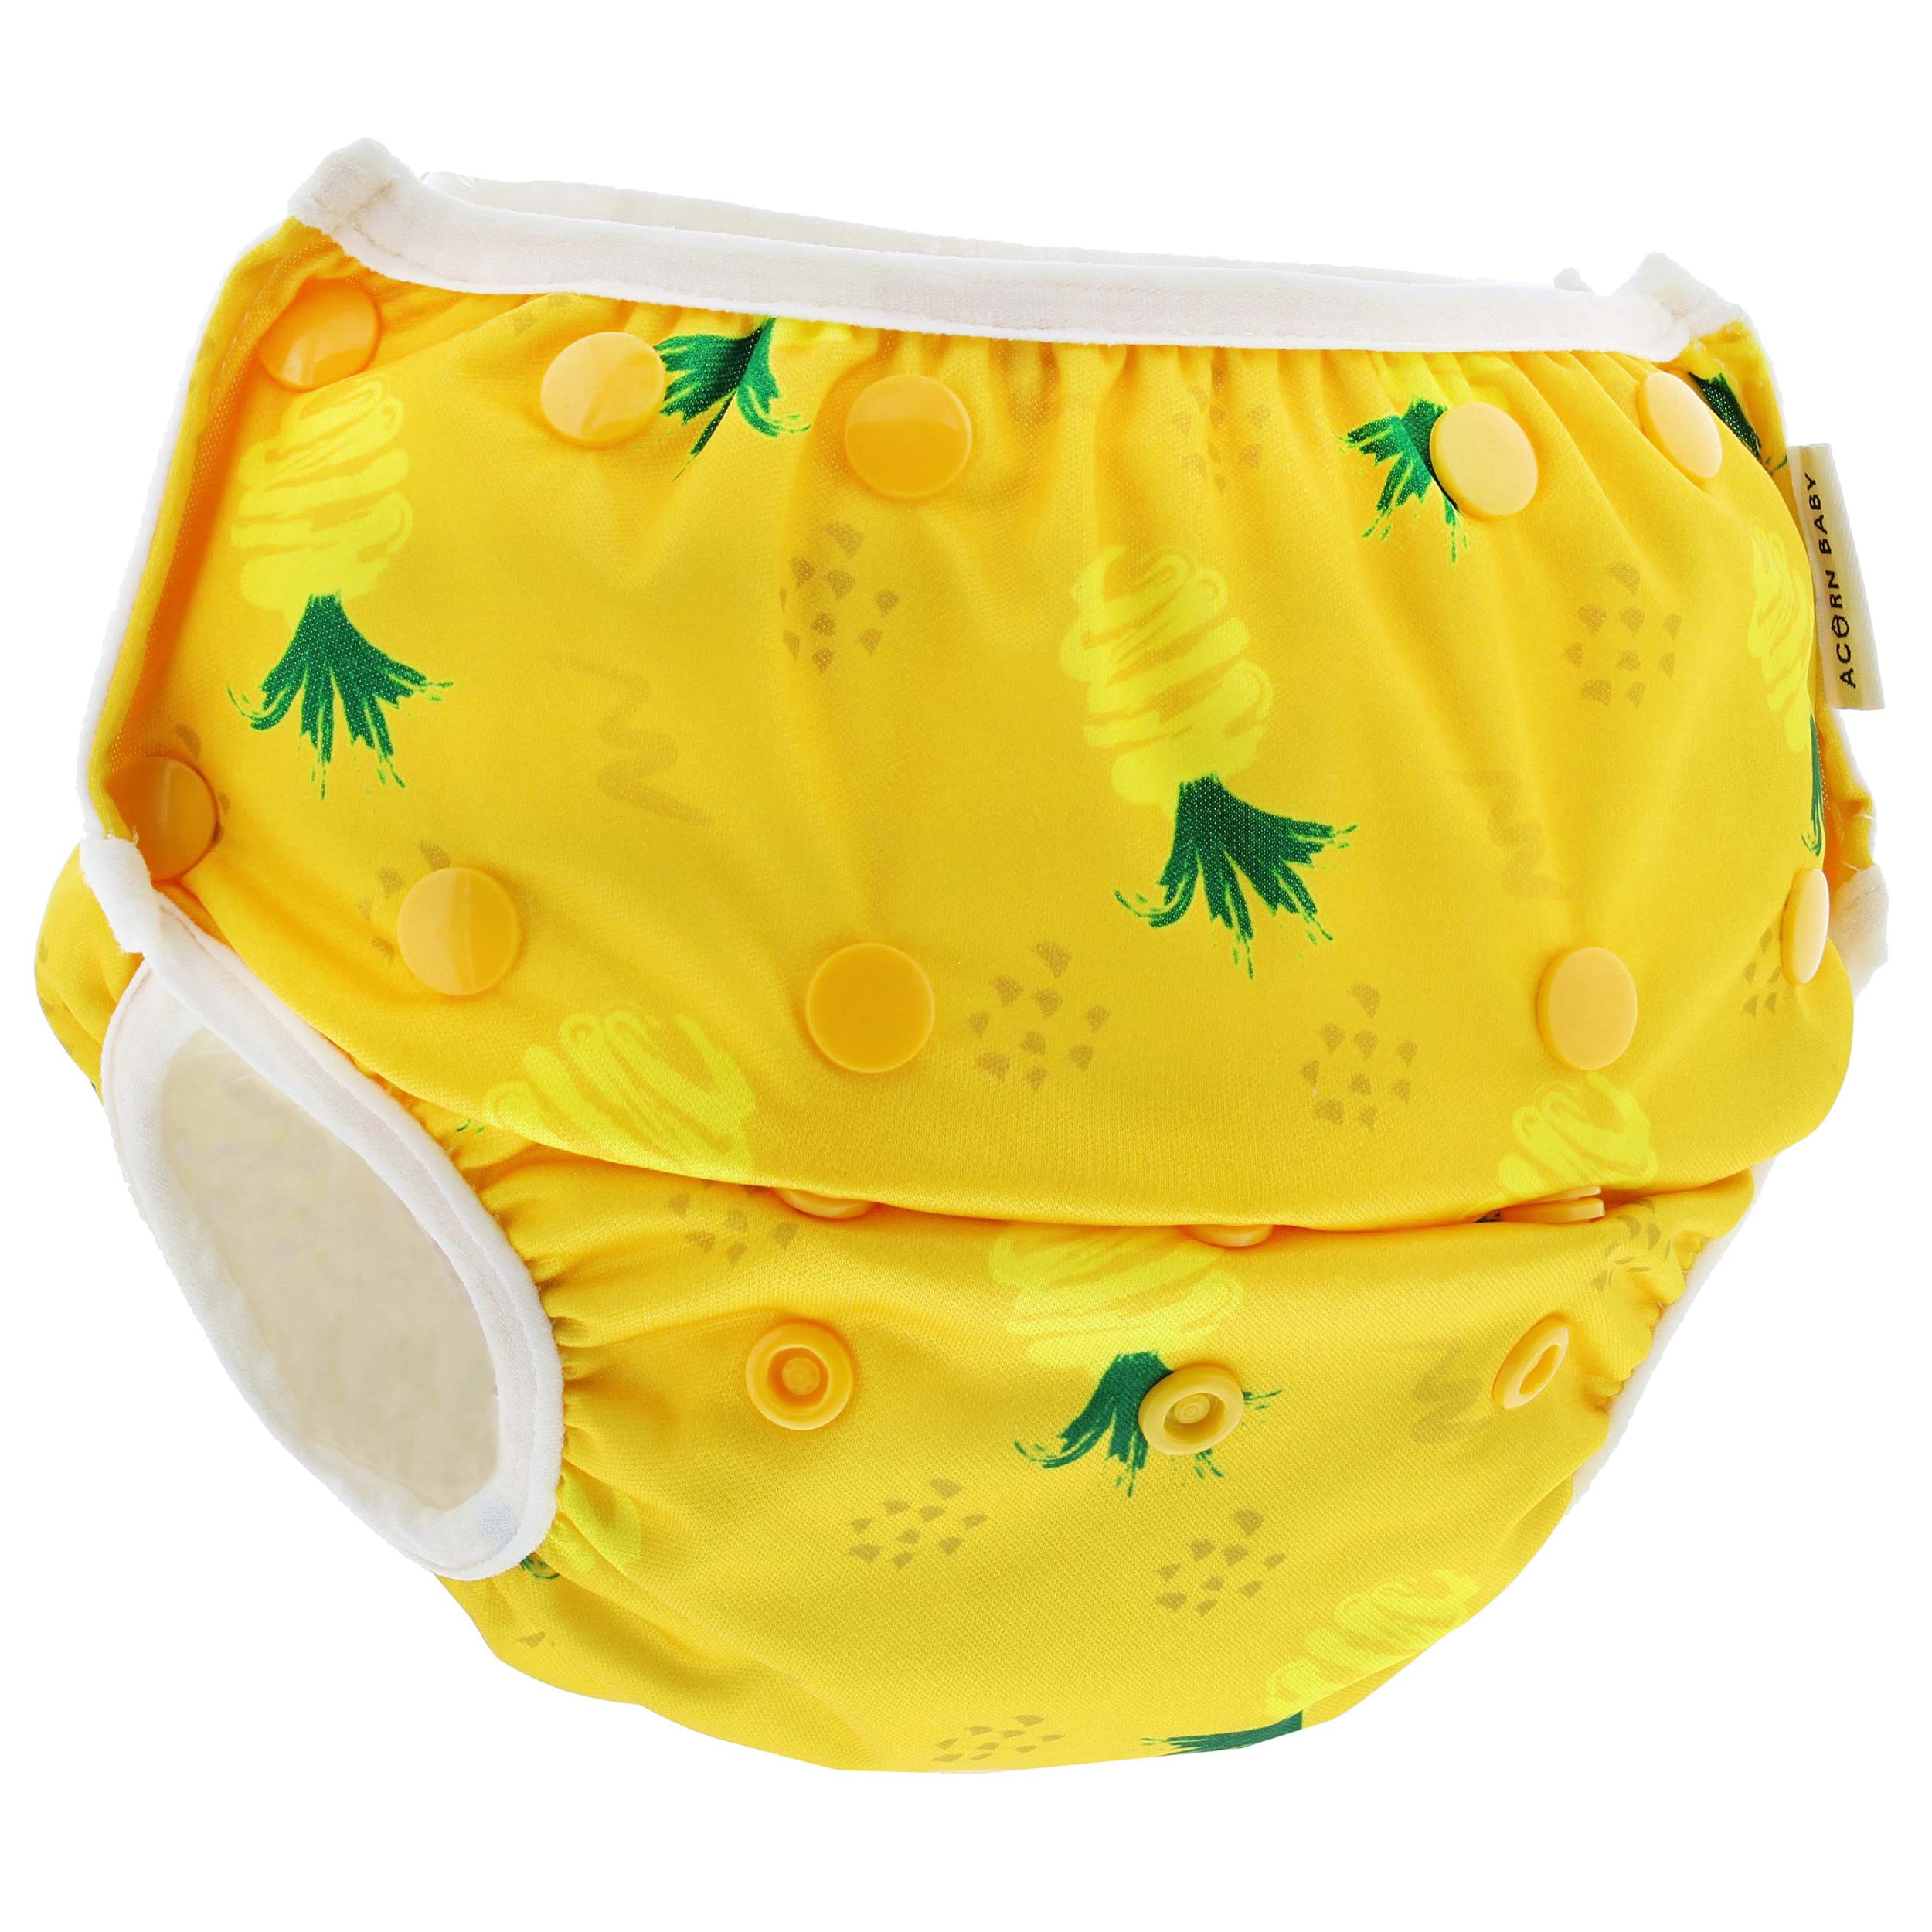 Acorn Baby Swim Diaper - Yellow Pineapple Size 0-5 Adjustable Toddler and Baby Swimming Diaper Reusable Swimmers